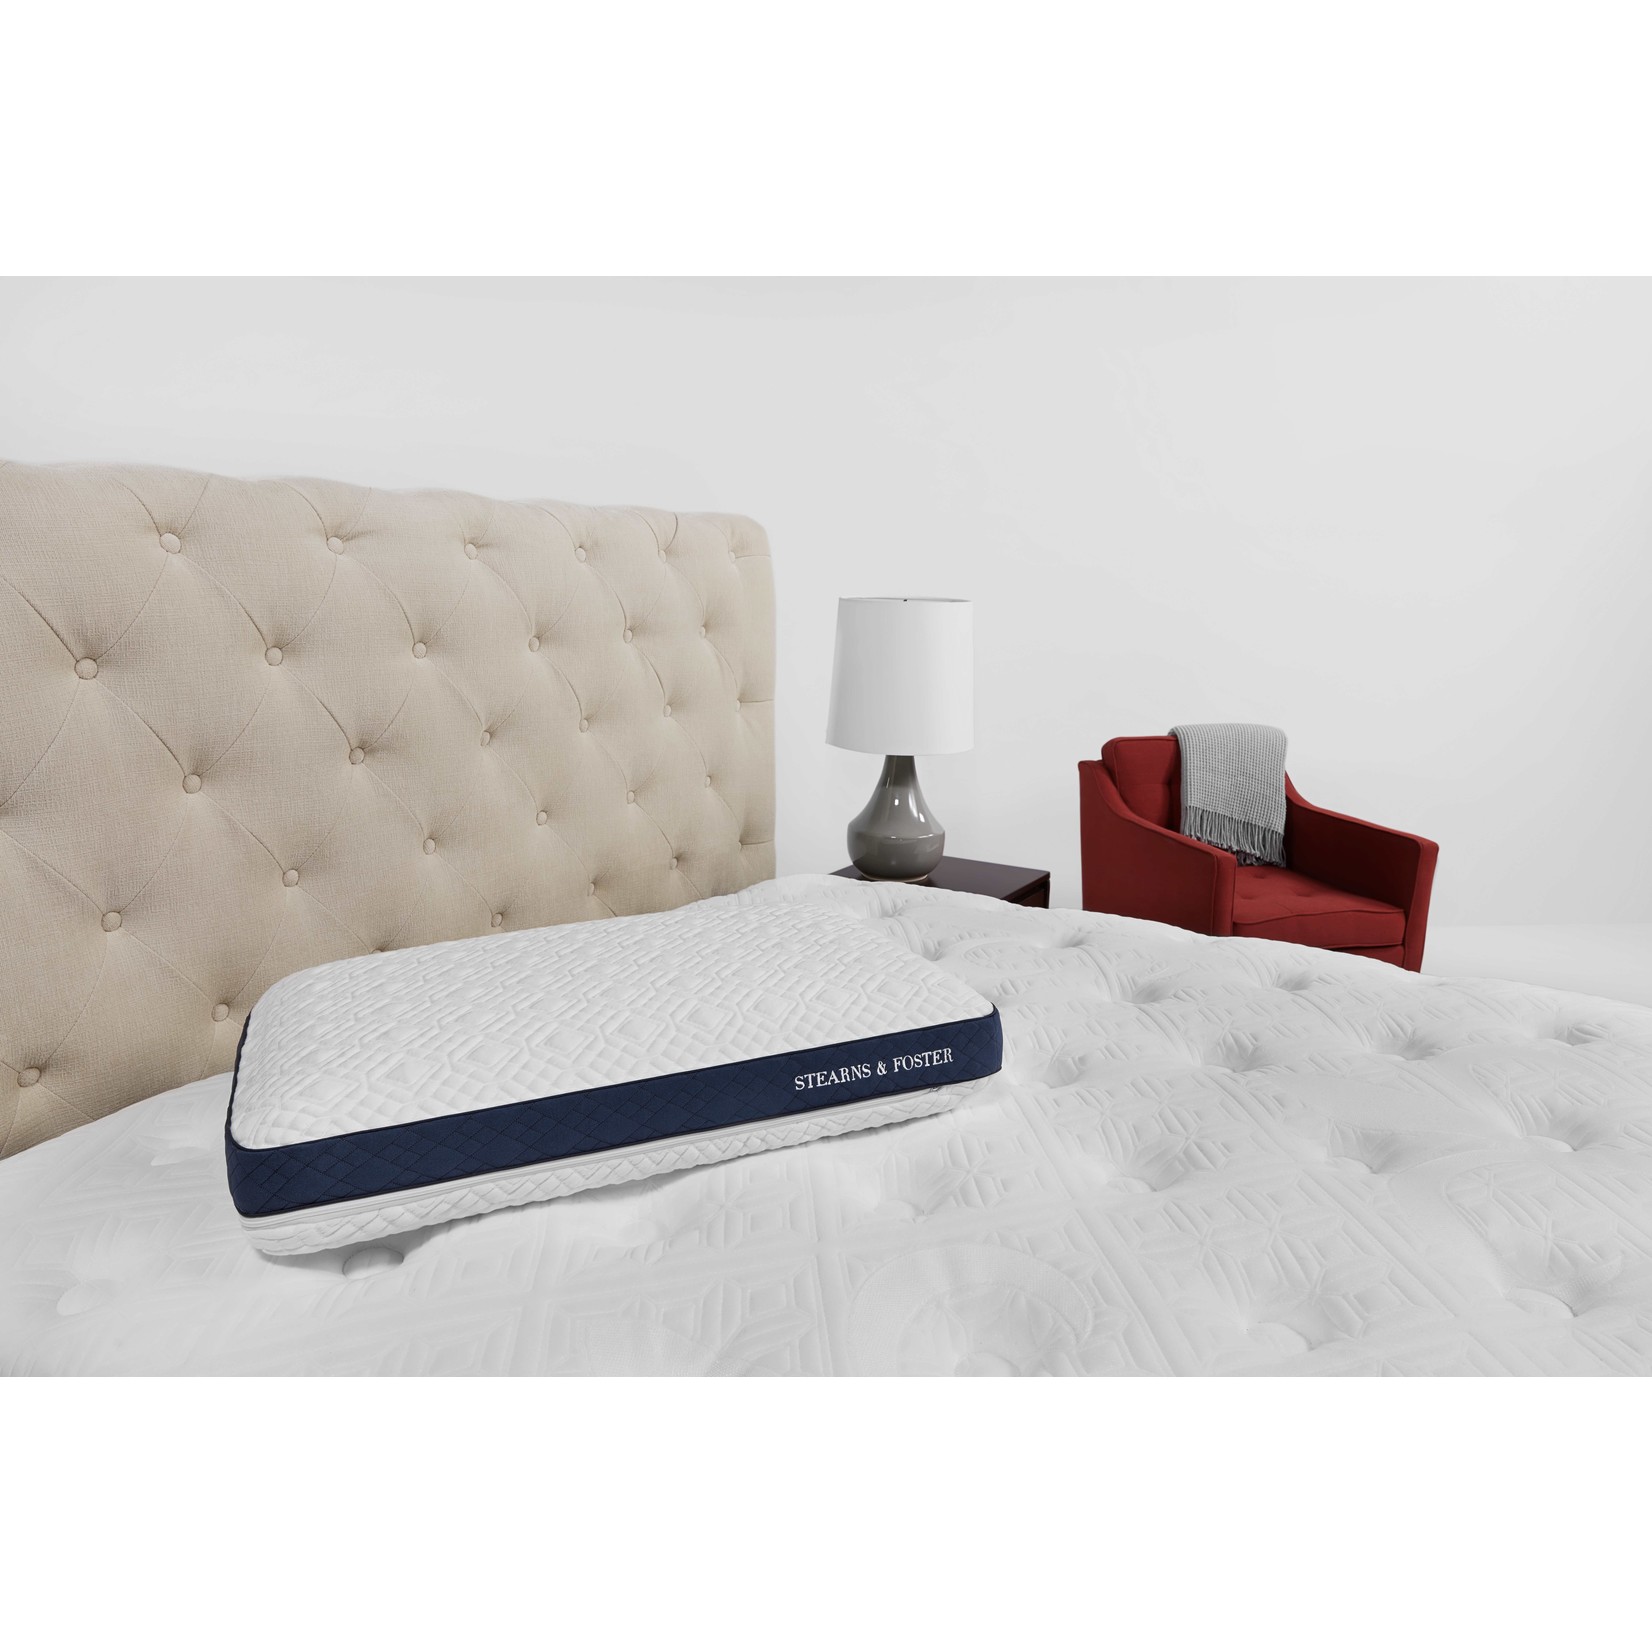 STEARN AND FOSTER STEARNS & FOSTER MEMORY FOAM PILLOW